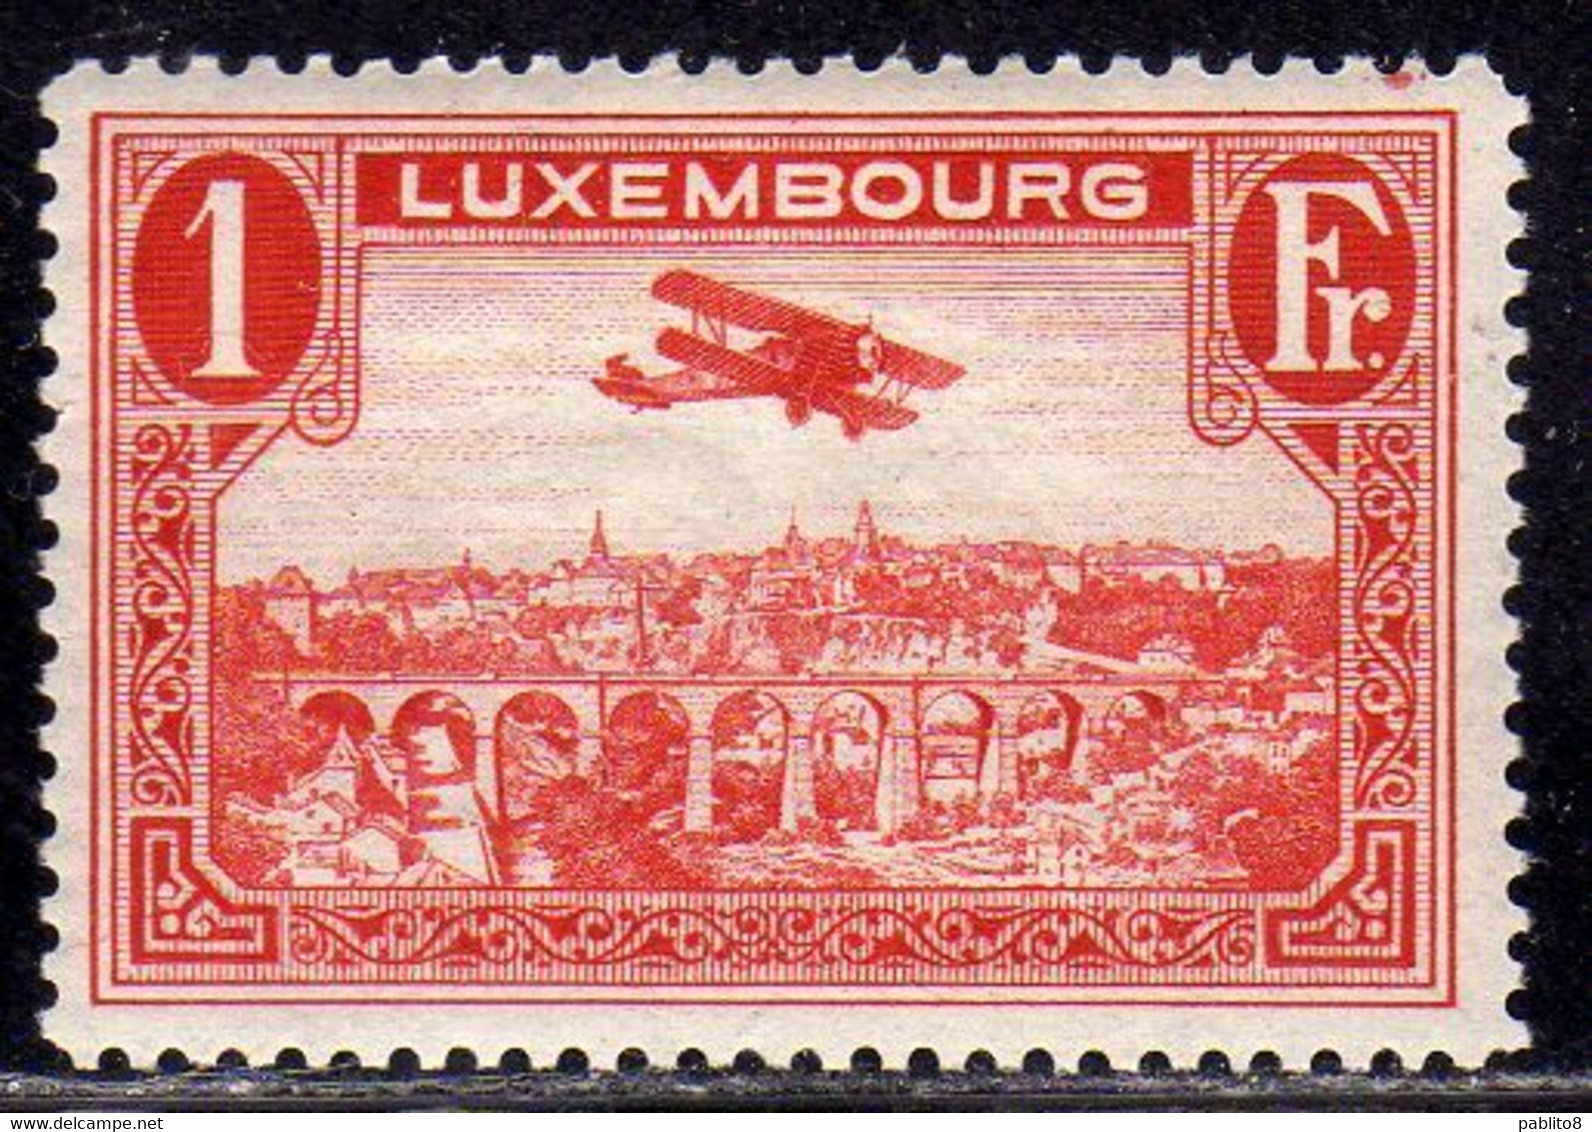 LUXEMBOURG LUSSEMBURGO 1931 1933 AIR POST STAMPS AIRMAIL AIRPLANE OVER POSTA AEREA 1fr MNH - Ungebraucht